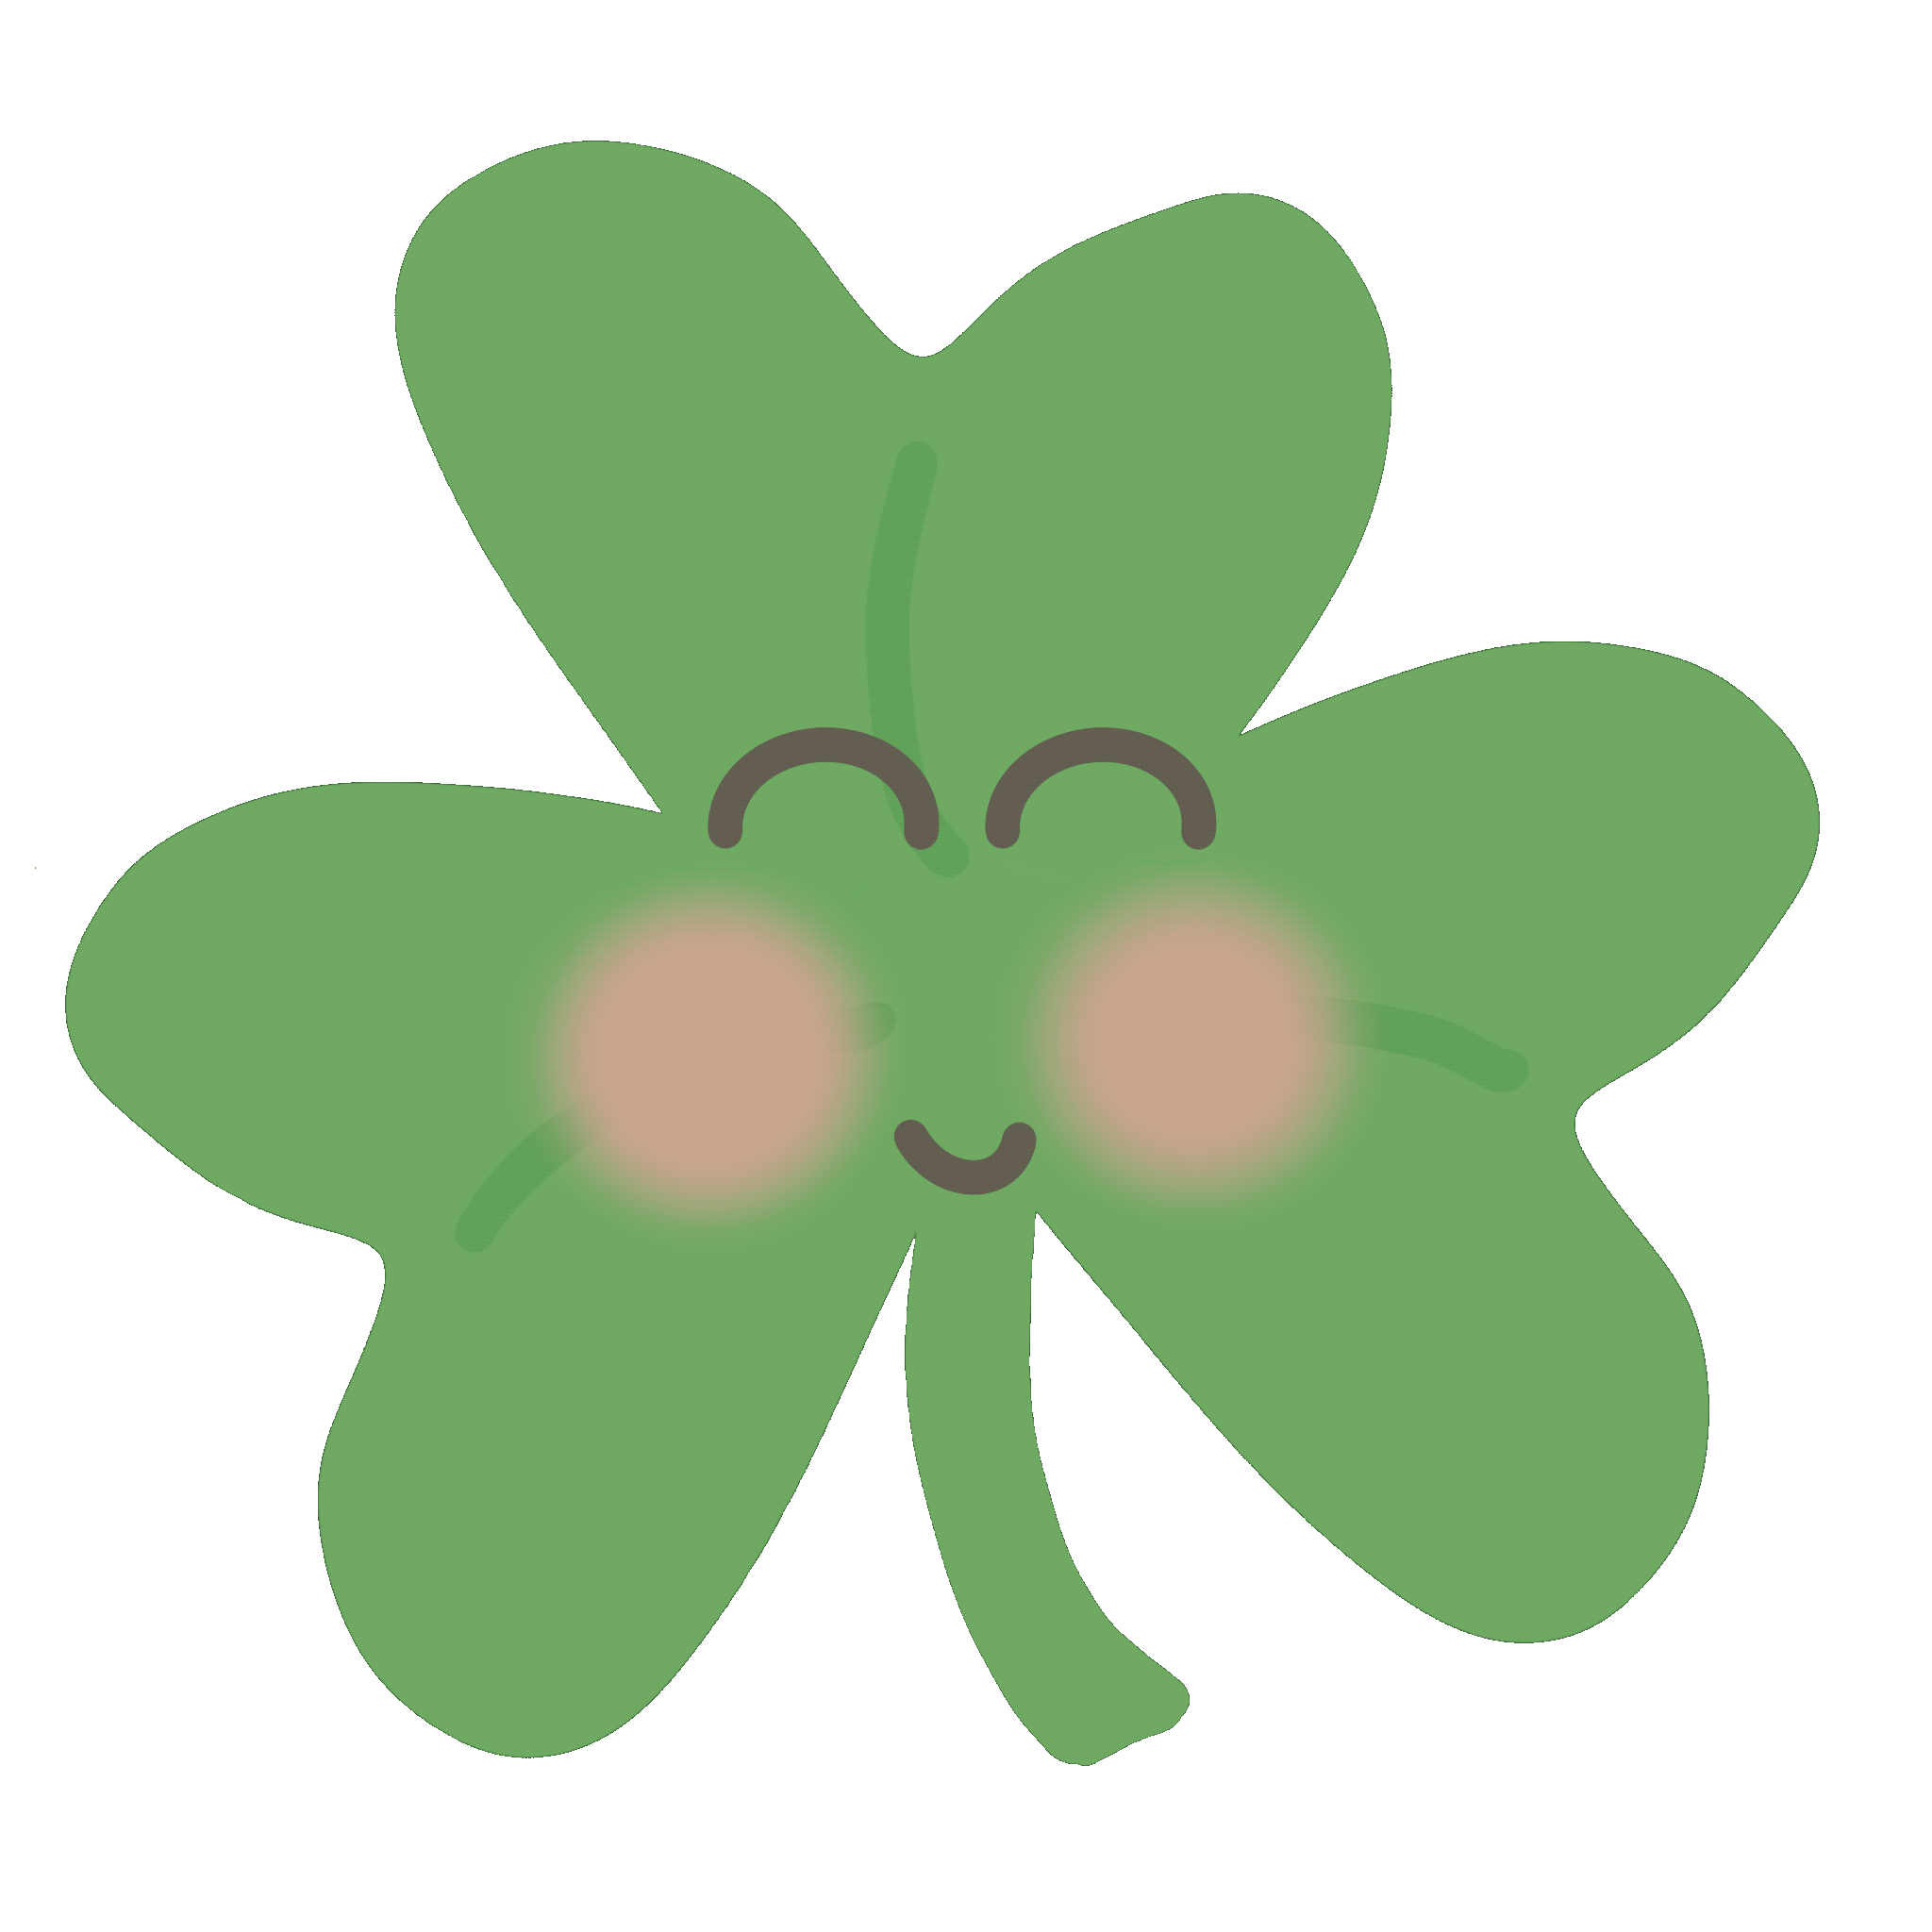 St Patricks Day Ireland Sticker for iOS & Android | GIPHY